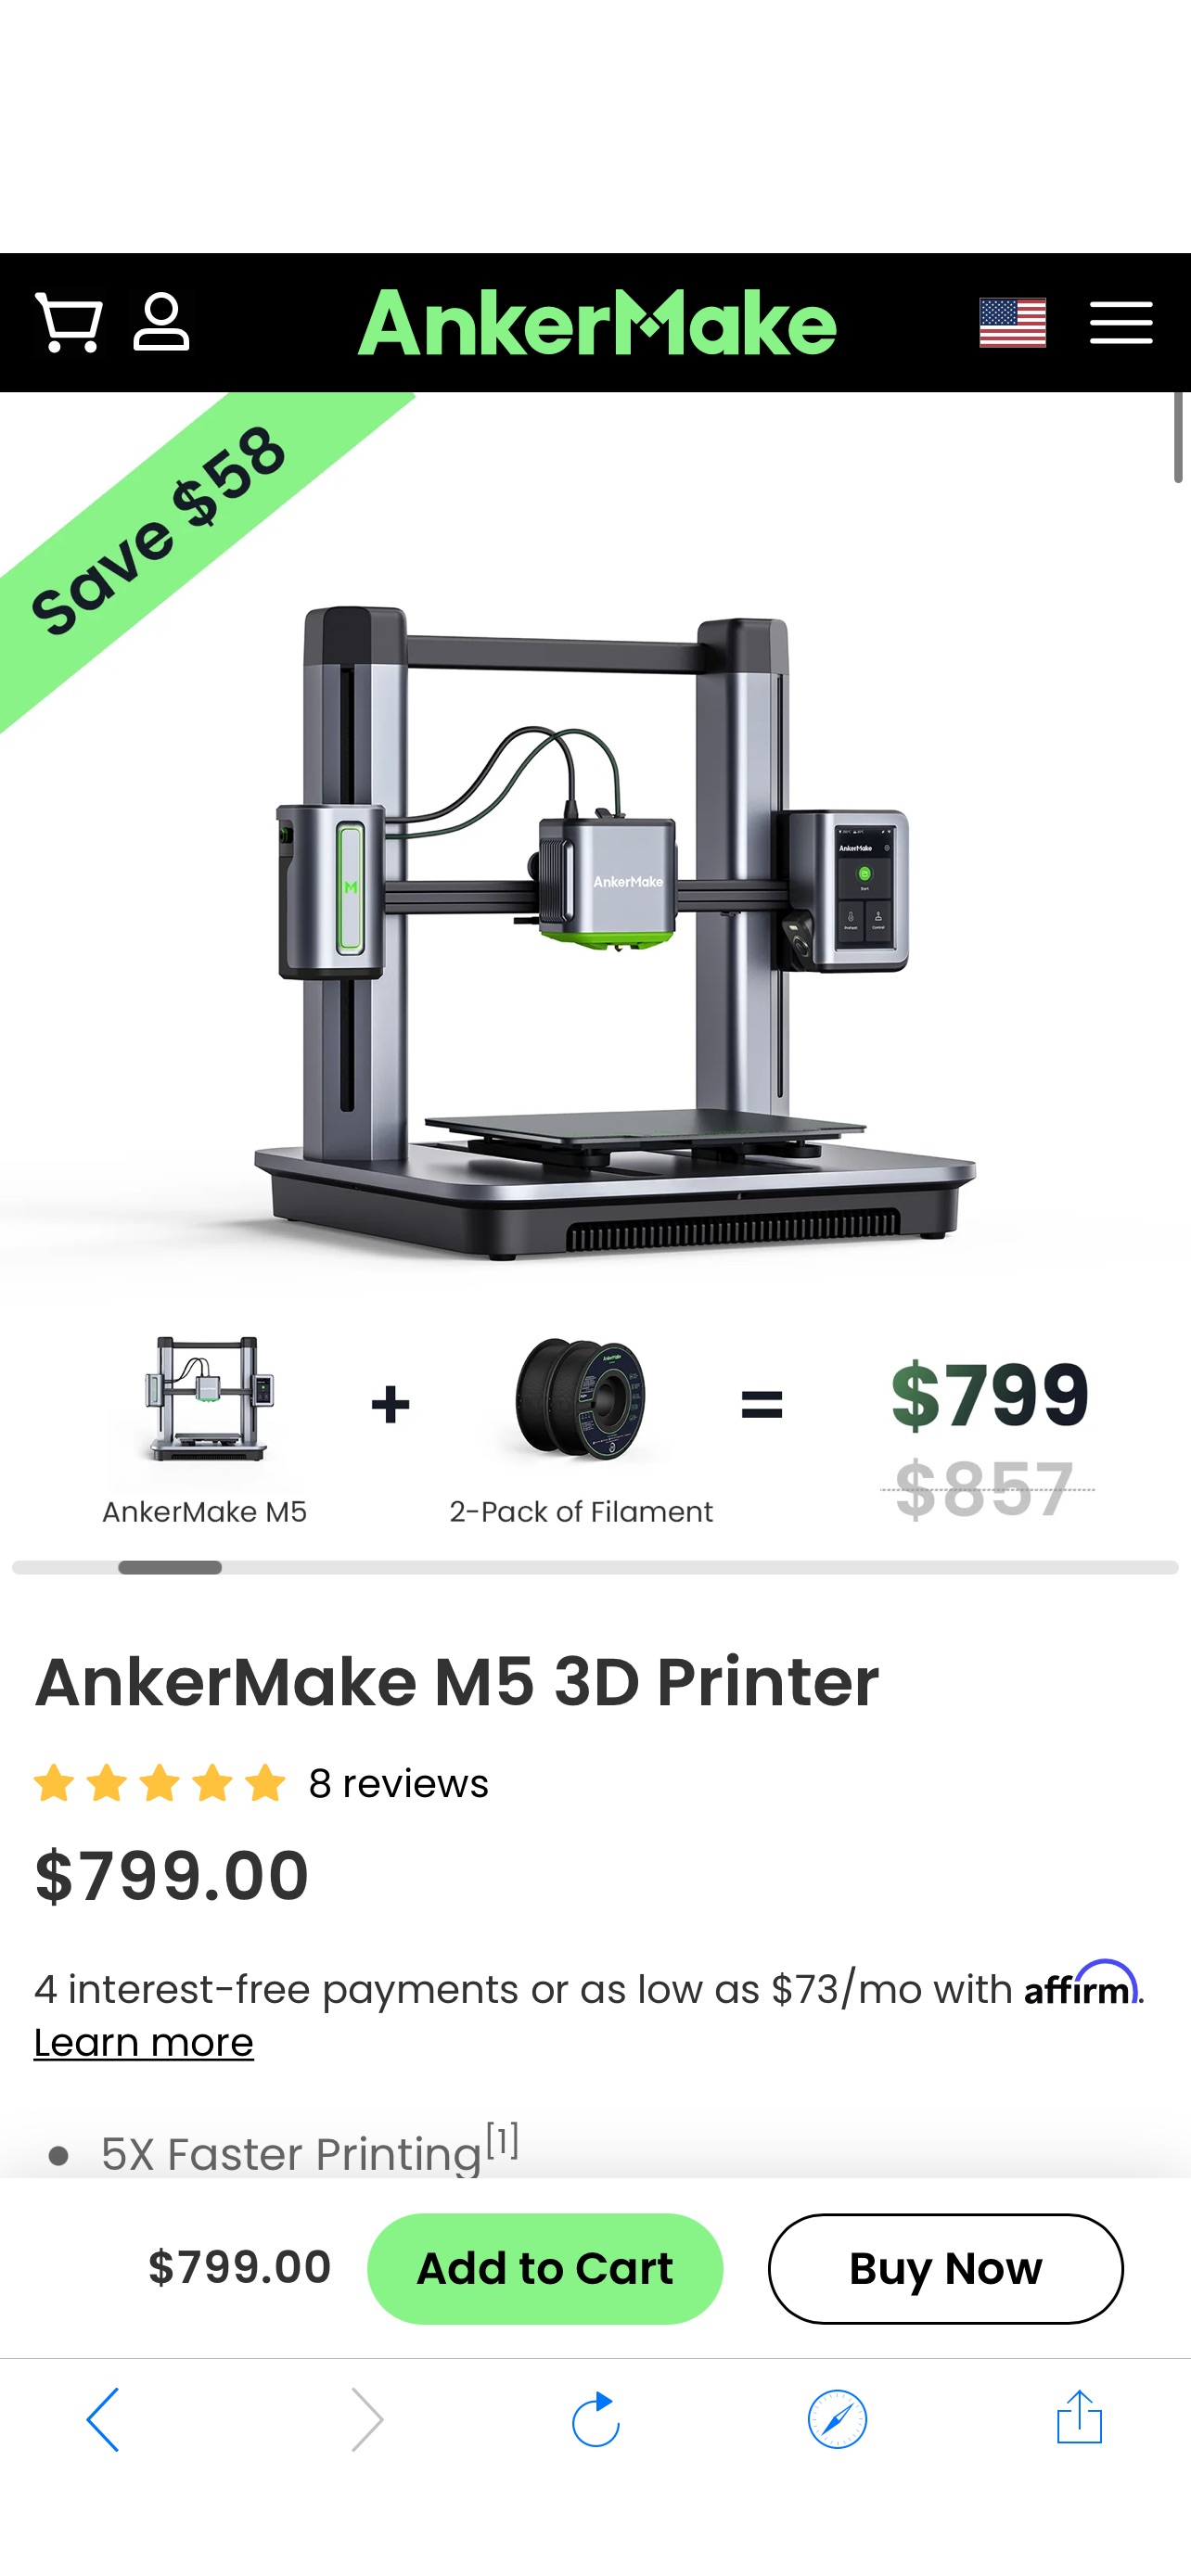 AnkerMake | Explore the 3D Printing Frontier - Ankermake US